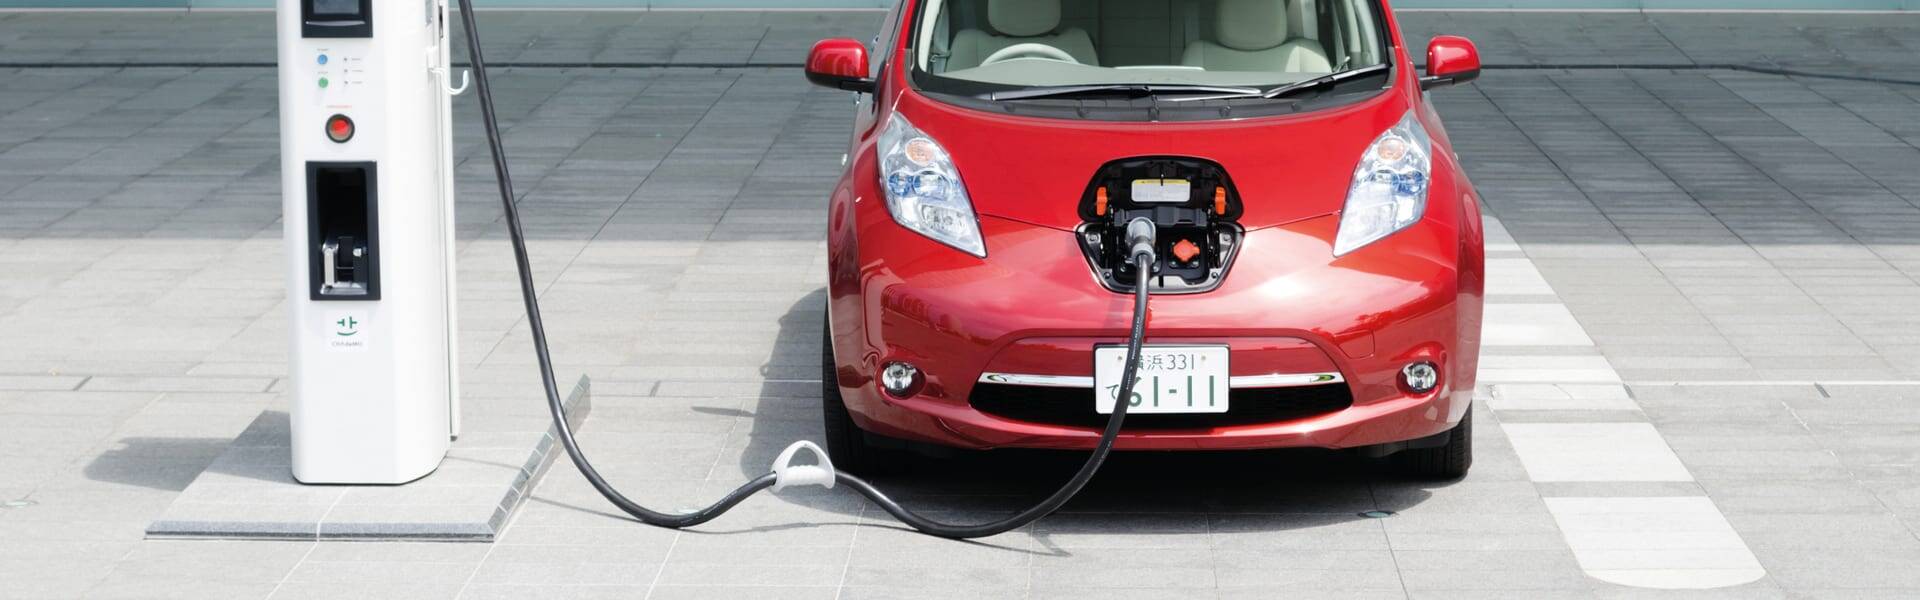 95% of EV drivers willing to use smart charging